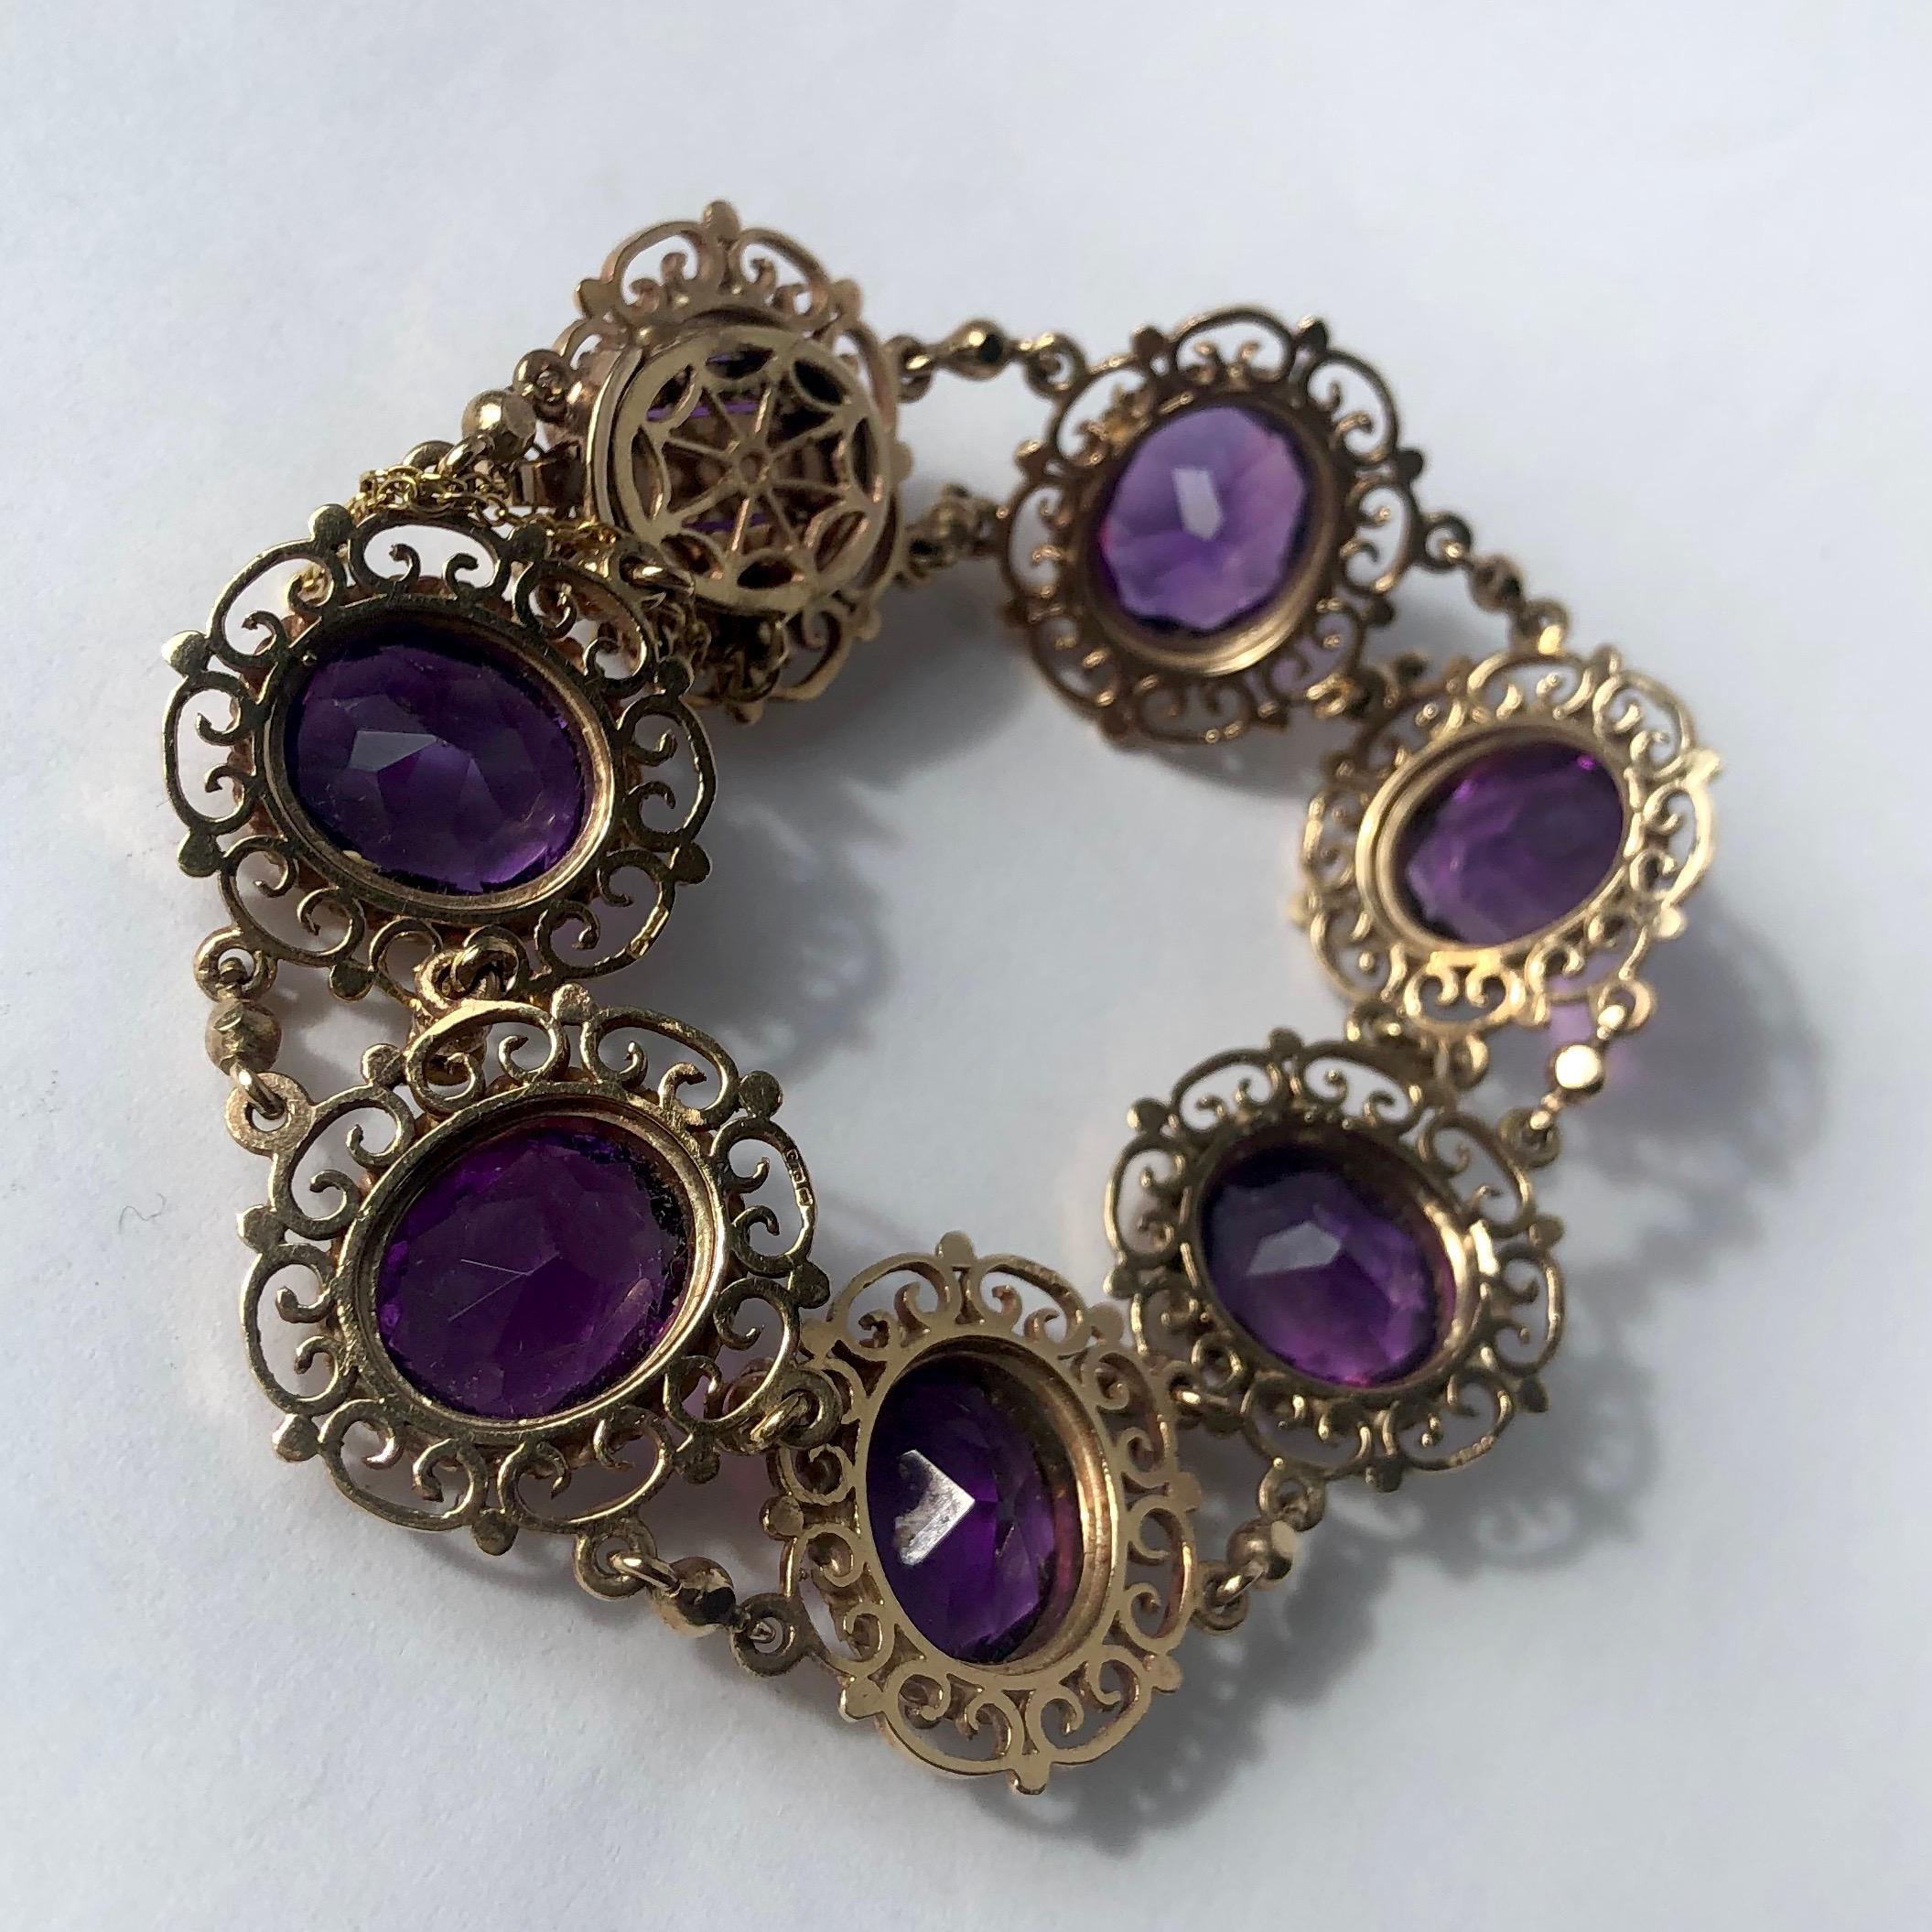 Each link in this bracelet is loaded with detail and holds seven gorgeous amethyst stones. The style of the bracelet has a very Art Deco feel and is wonderfully stylish. 

Bracelet Length: 6.5inches
Width: 19mm 

Weight: 29.3g